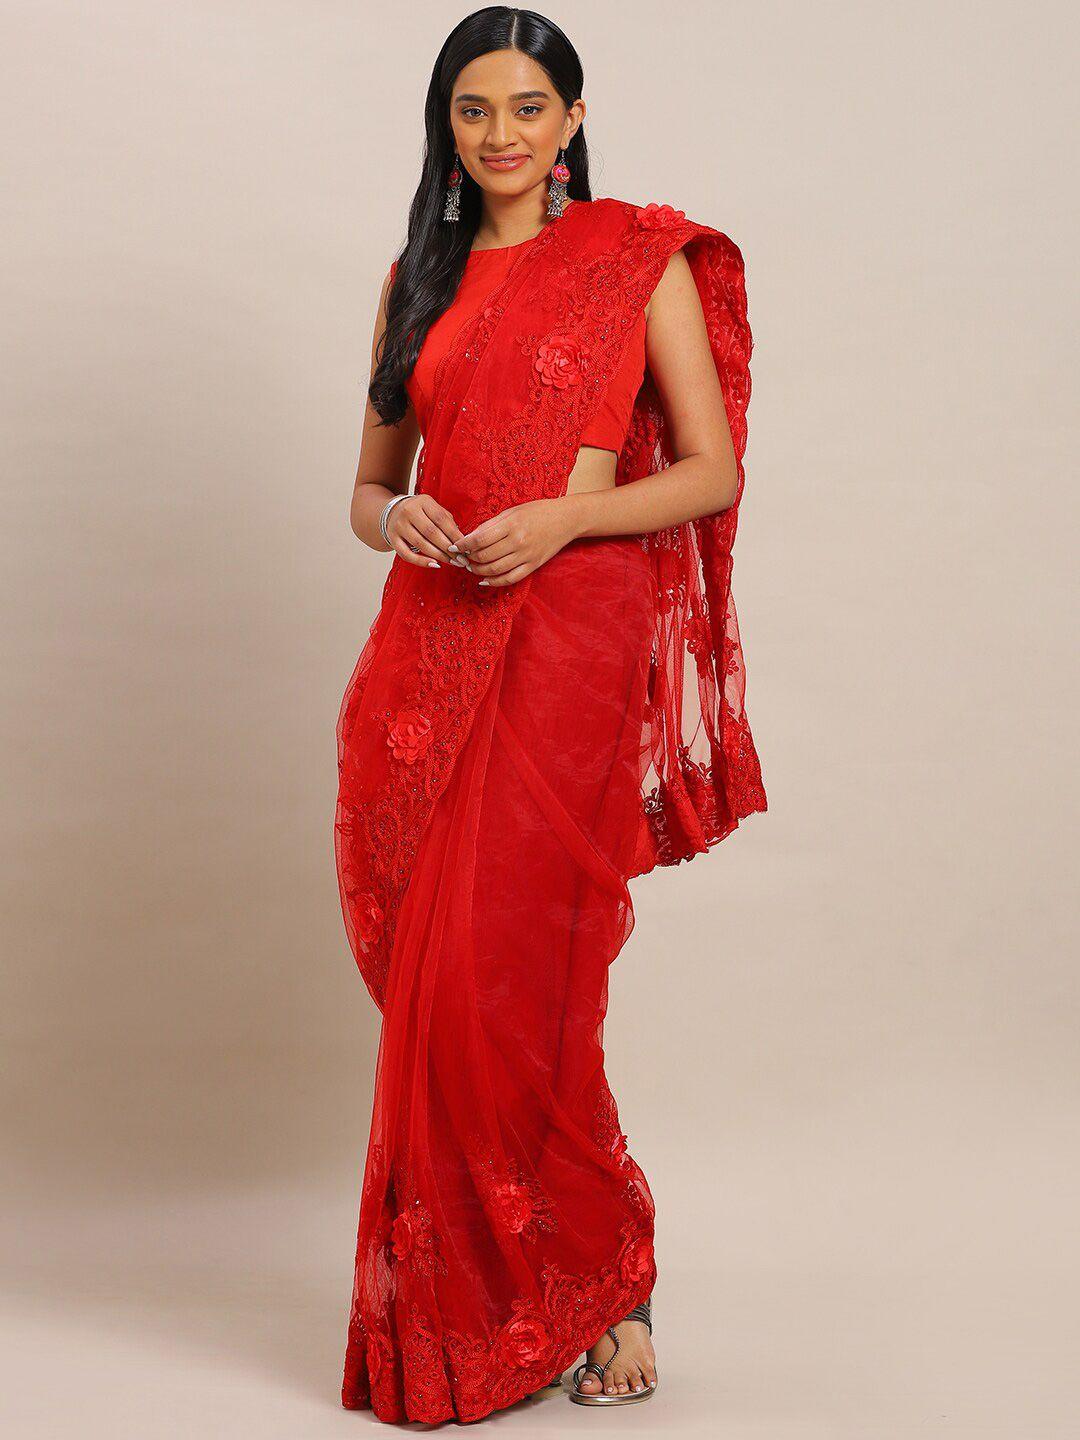 here&now embellished beads and stones net saree